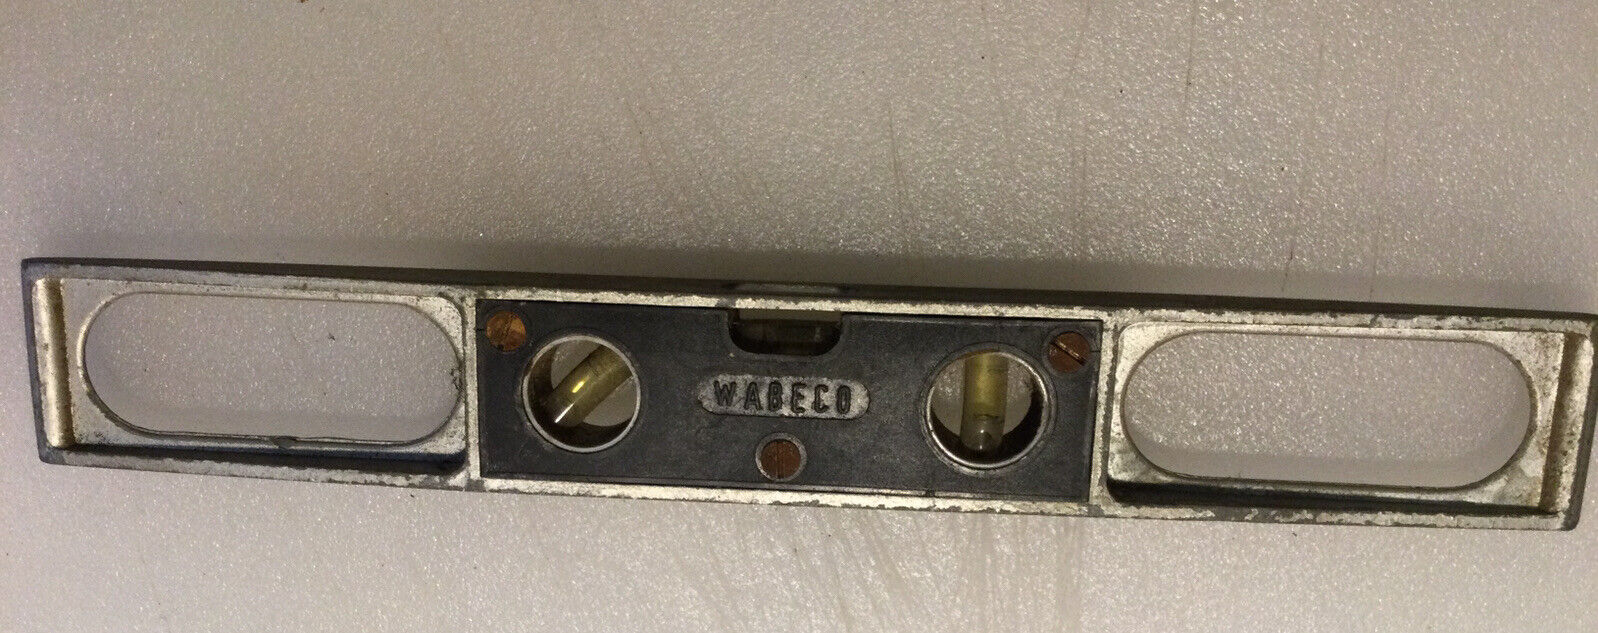 Vintage Wabeco 9” metal level from Western Germany used